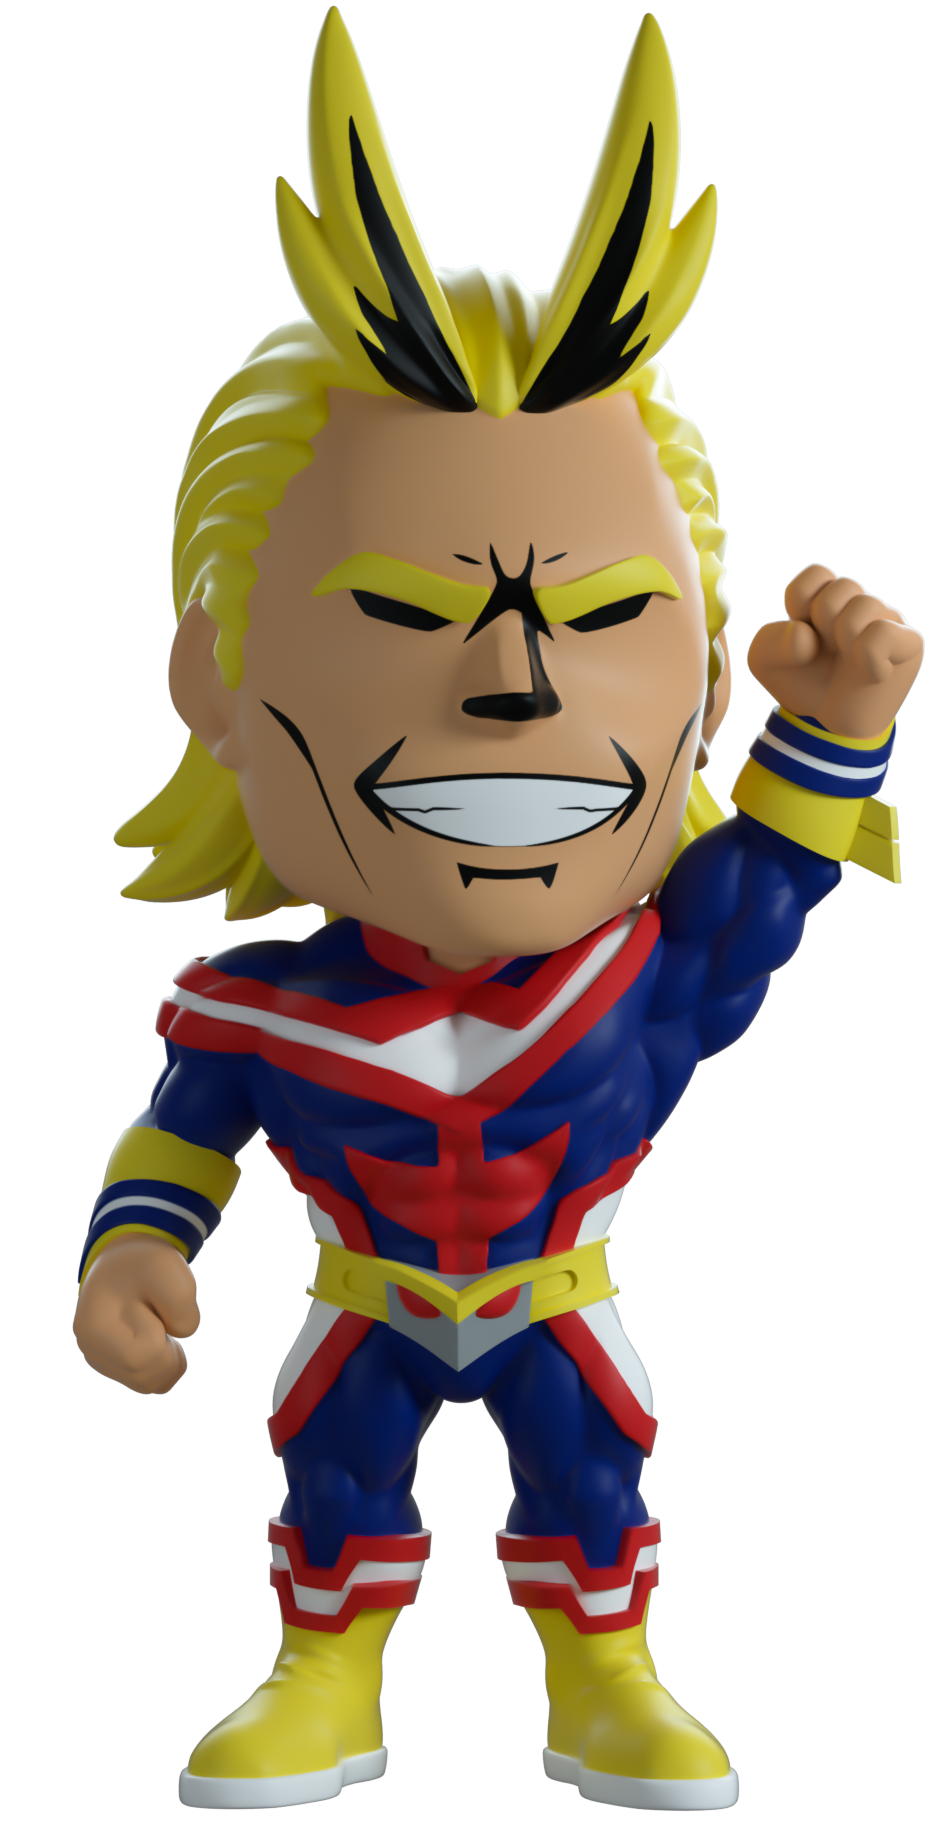 Youtooz : My Hero Academia Collection - All Might #4 (Pre Order)